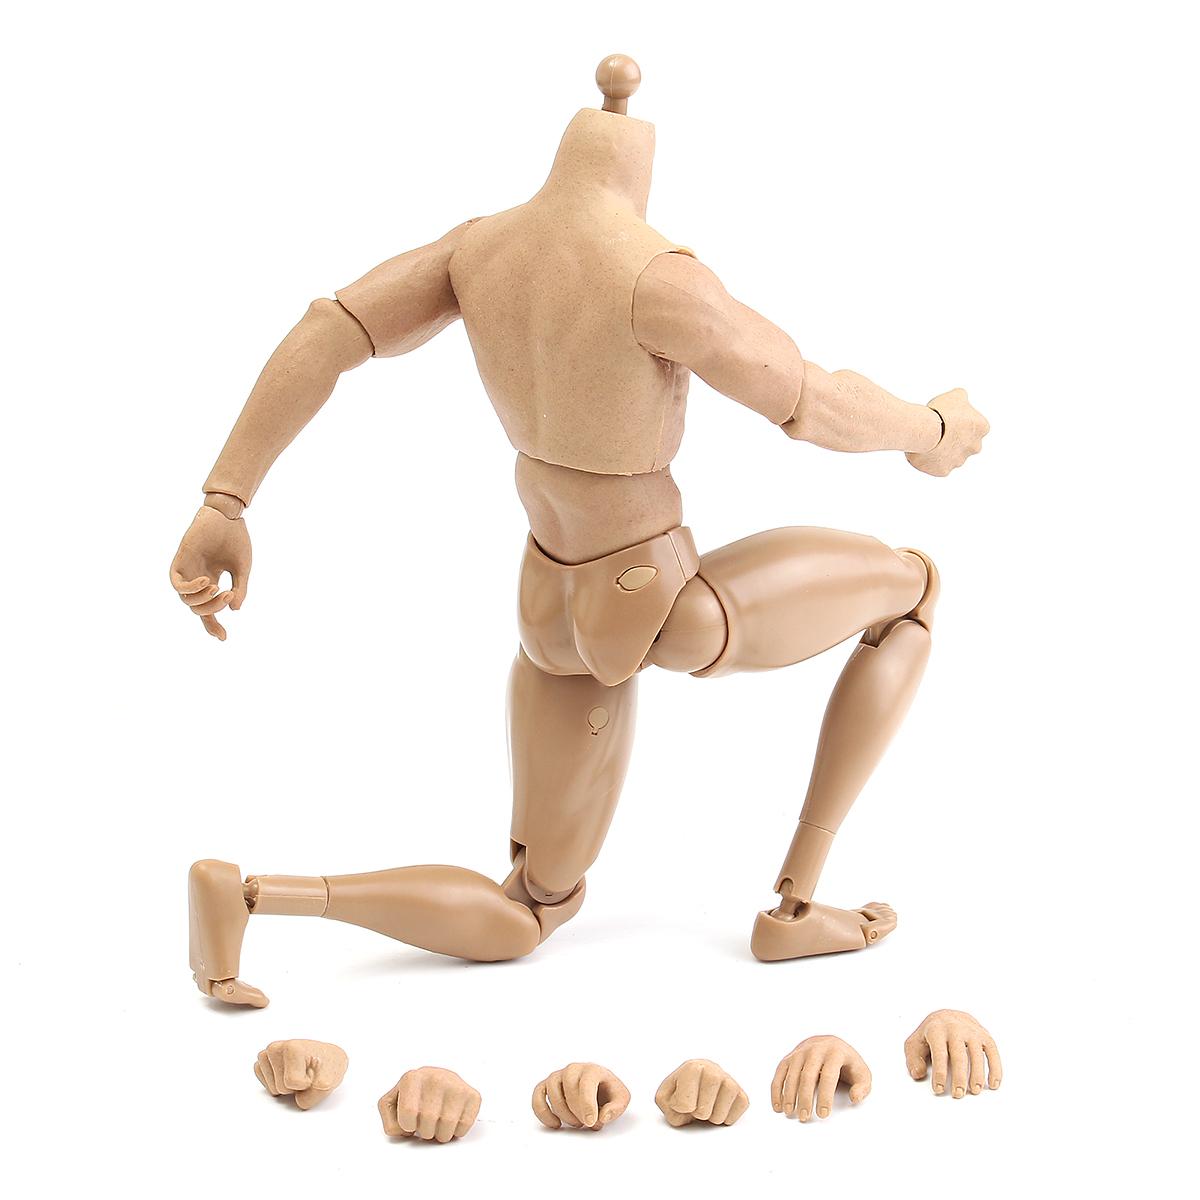 16-Scale-Action-Figure-Male-Nude-Muscular-Body-12quot-Plastic-Toy-for-TTM1819-1093229